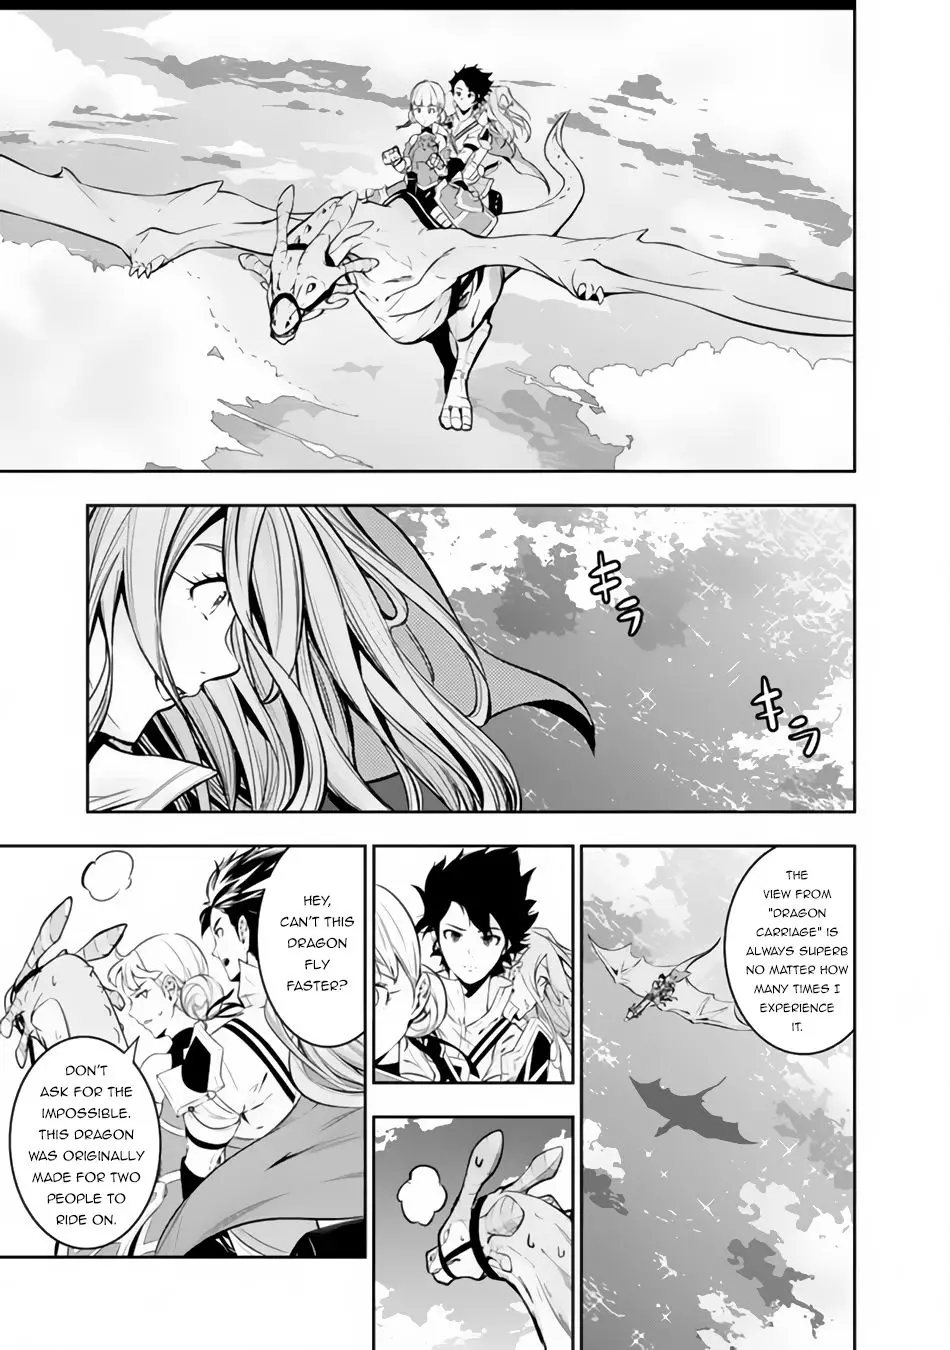 The Strongest Magical Swordsman Ever Reborn As An F-Rank Adventurer. - 71 page 12-1814f564